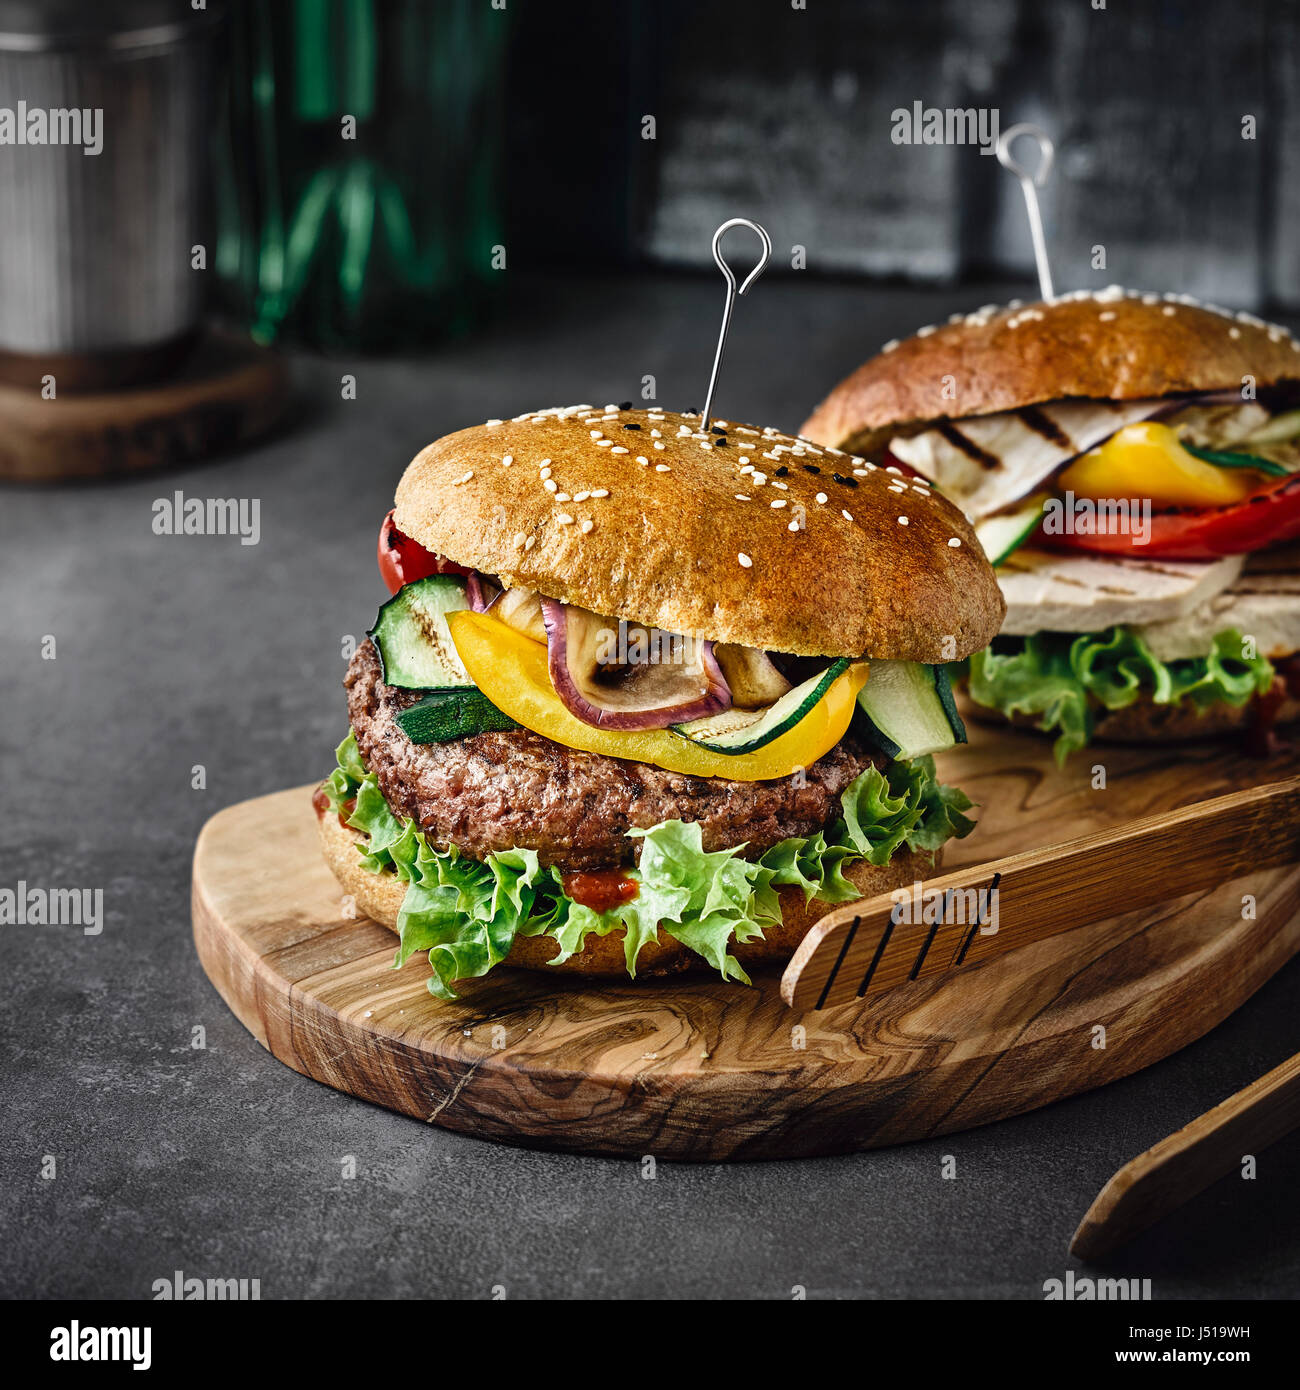 Beef burger and tofu variety with grilled vegetables Stock Photo